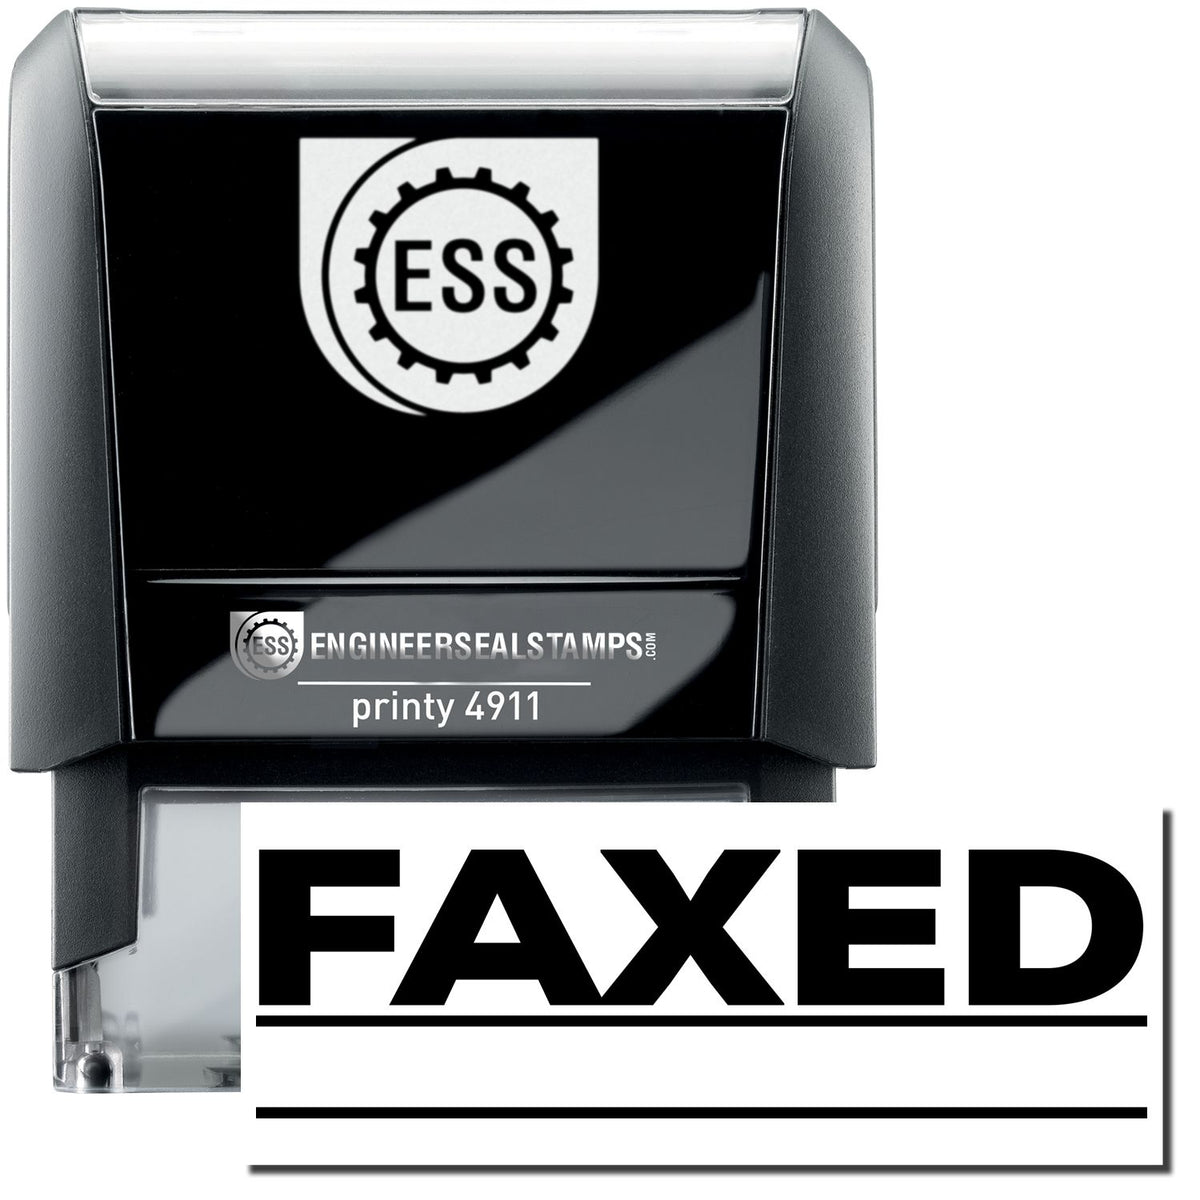 A self-inking stamp with a stamped image showing how the text &quot;FAXED&quot; with two lines below the text is displayed after stamping.